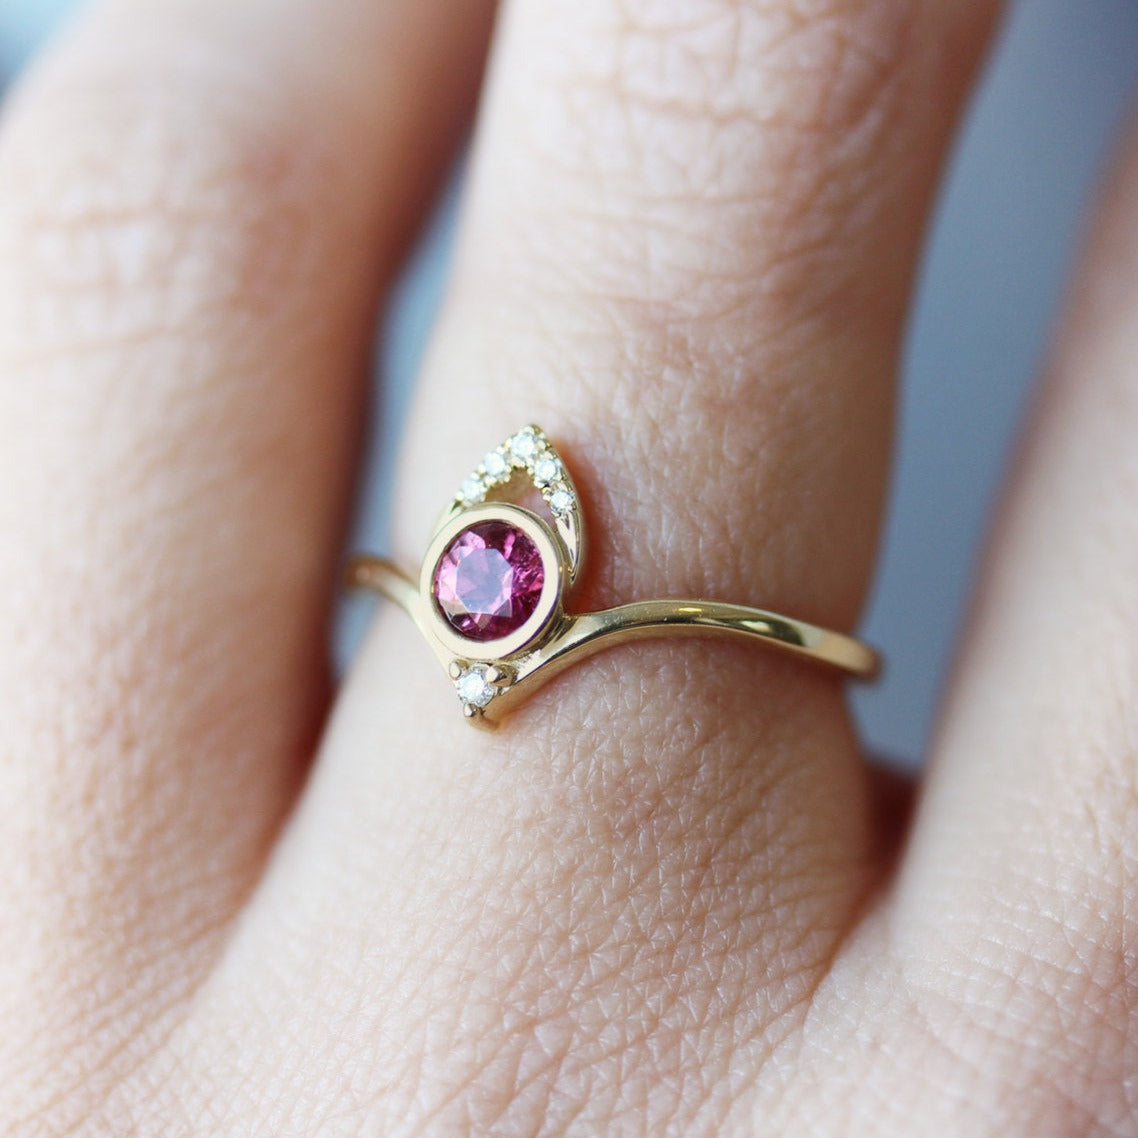 Pink Tourmaline Crown Diamond Engagement Rings Set, Valentine's Day gift for her, 14K Yellow Gold, Delicate gold ring, Size 7 - sillyshinydiamonds